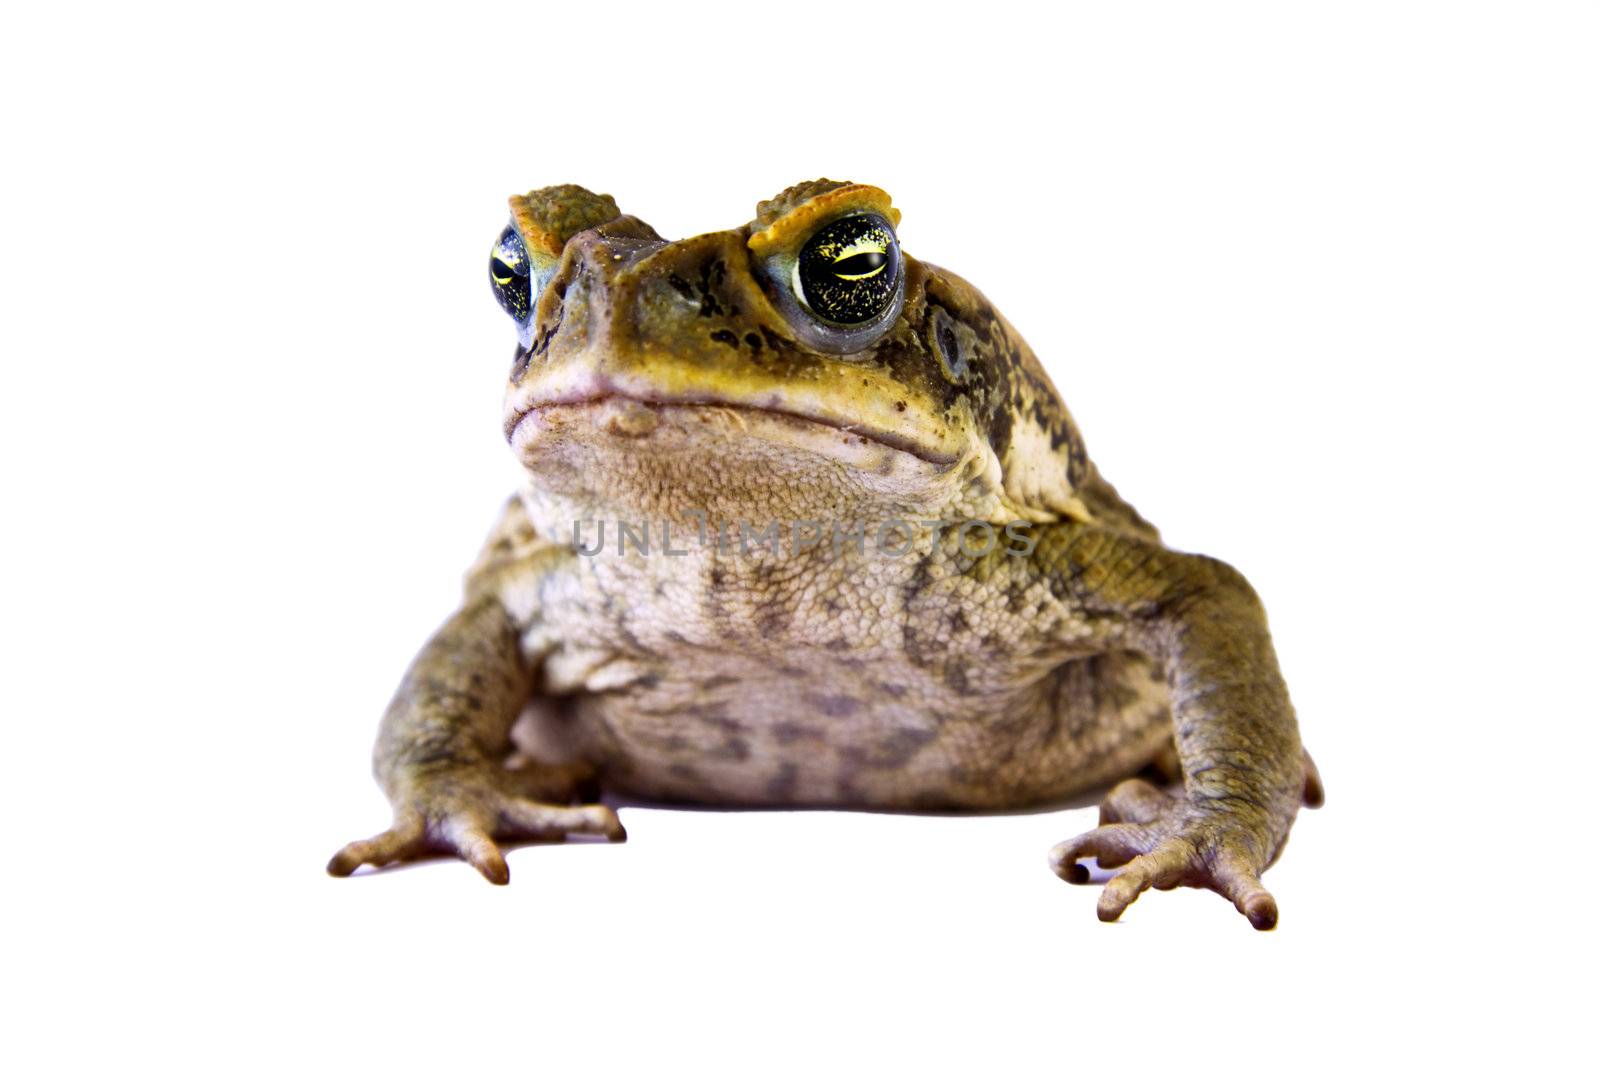 Cane toad (Bufo marinus) Closeup and isolated over white by Jaykayl